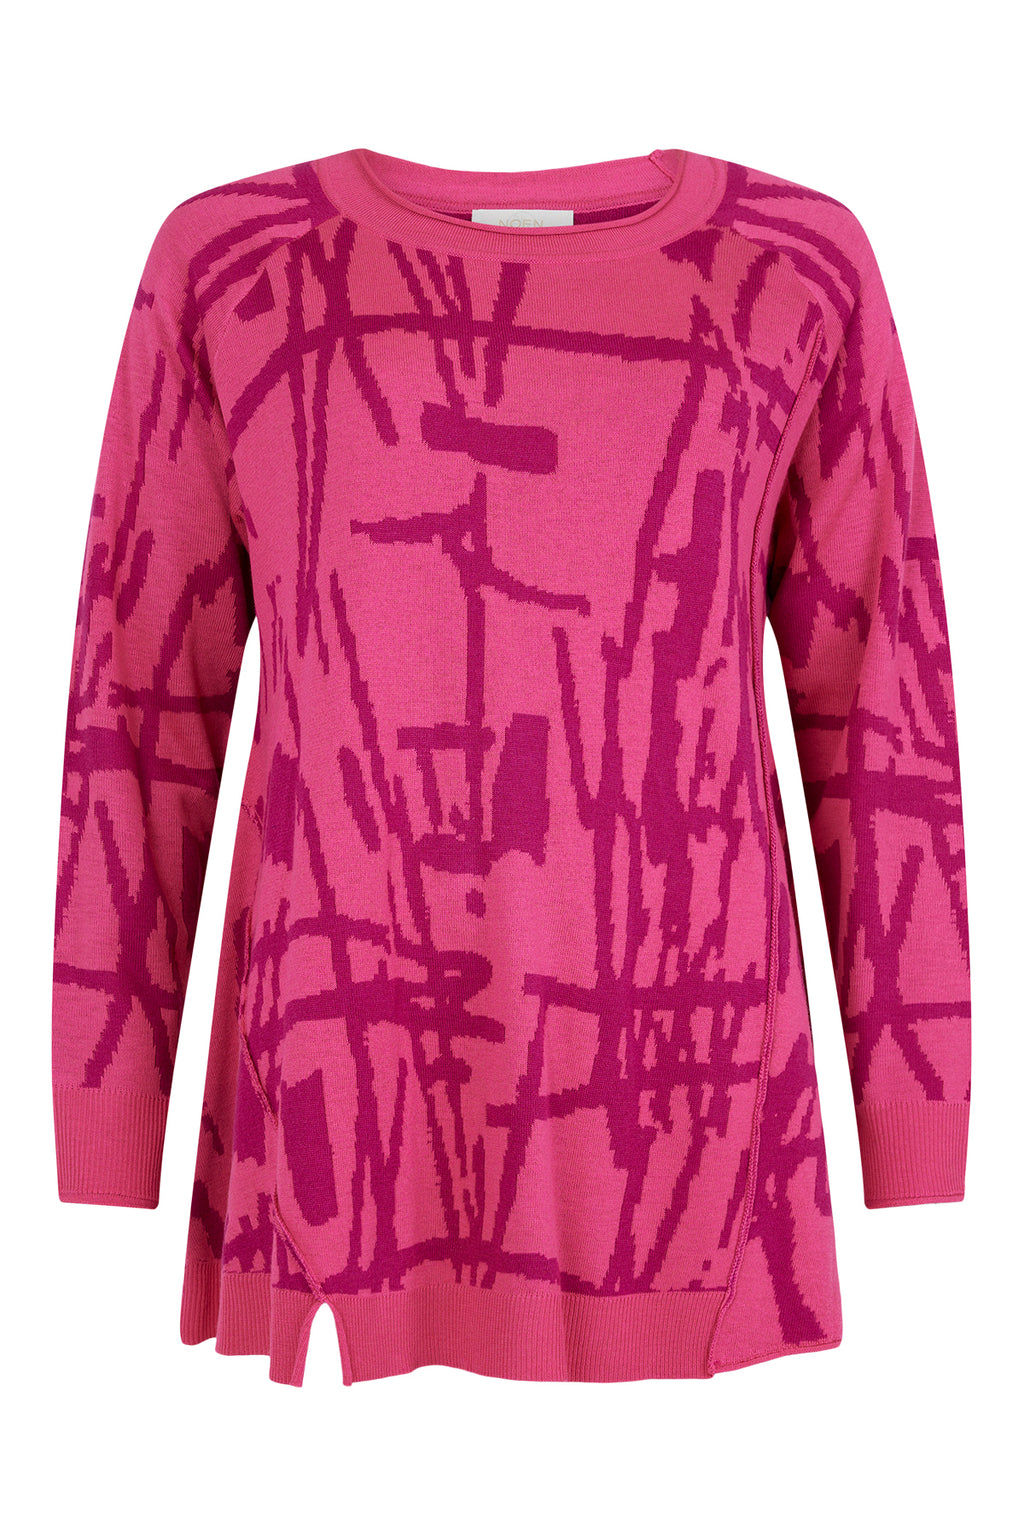 Introducing the epitome of elegance: a captivating fusion of pink and rich purple berry tones in a sumptuous luxury pattern knit jumper. With its loose fitting and unique raglan sleeve adorned with exposed seams, this garment boasts an enchanting design feature that sets it apart.